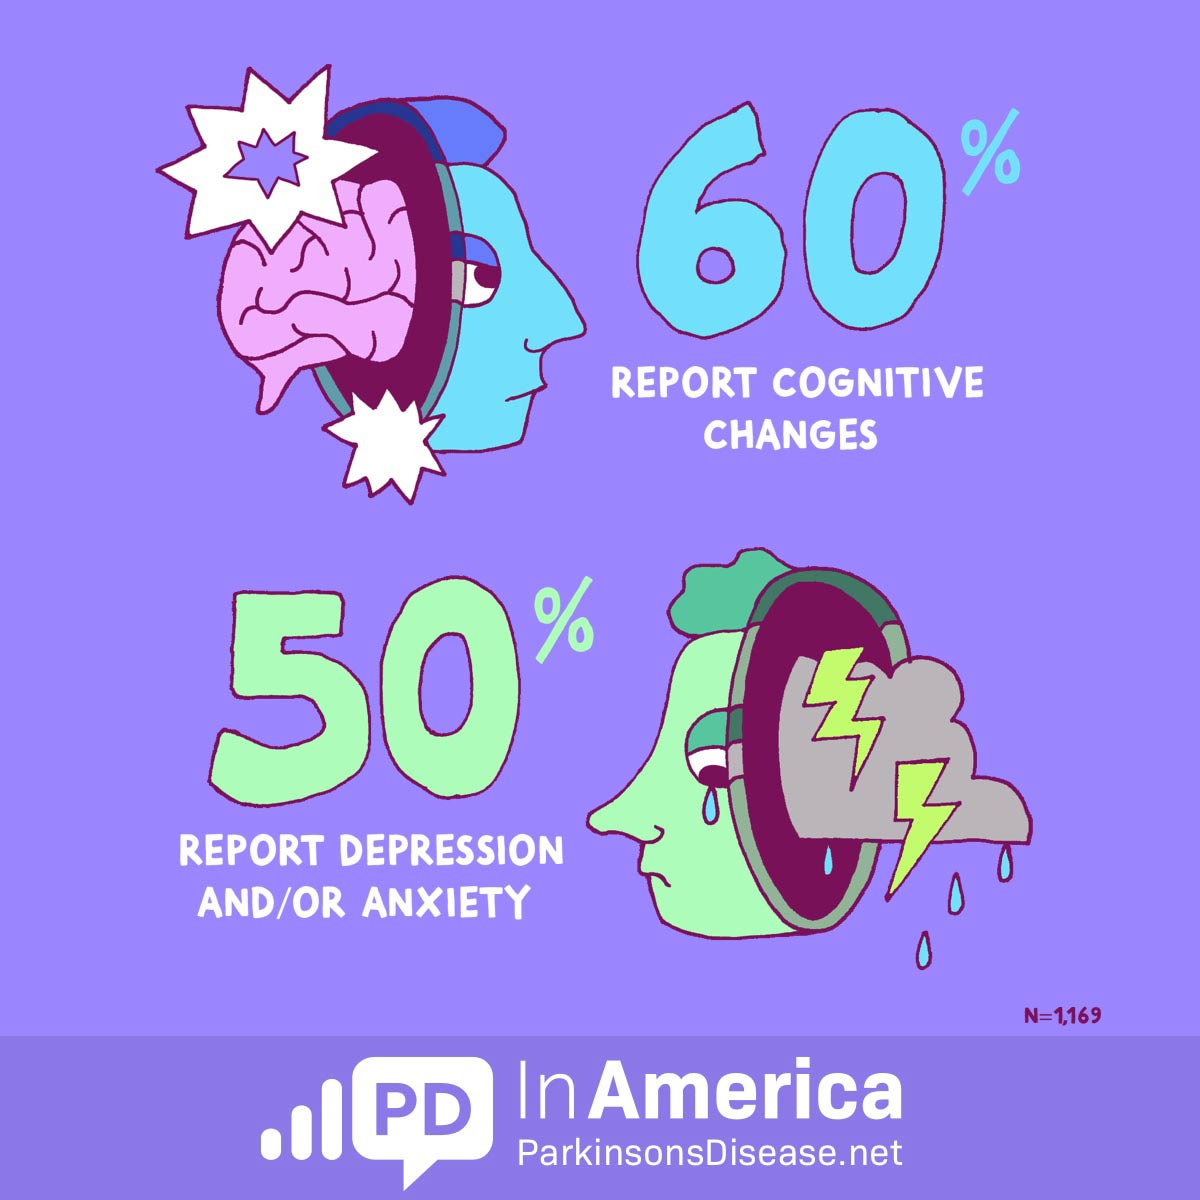 60% of respondents report cognitive changes. 50% of respondents report depression and/or anxiety.